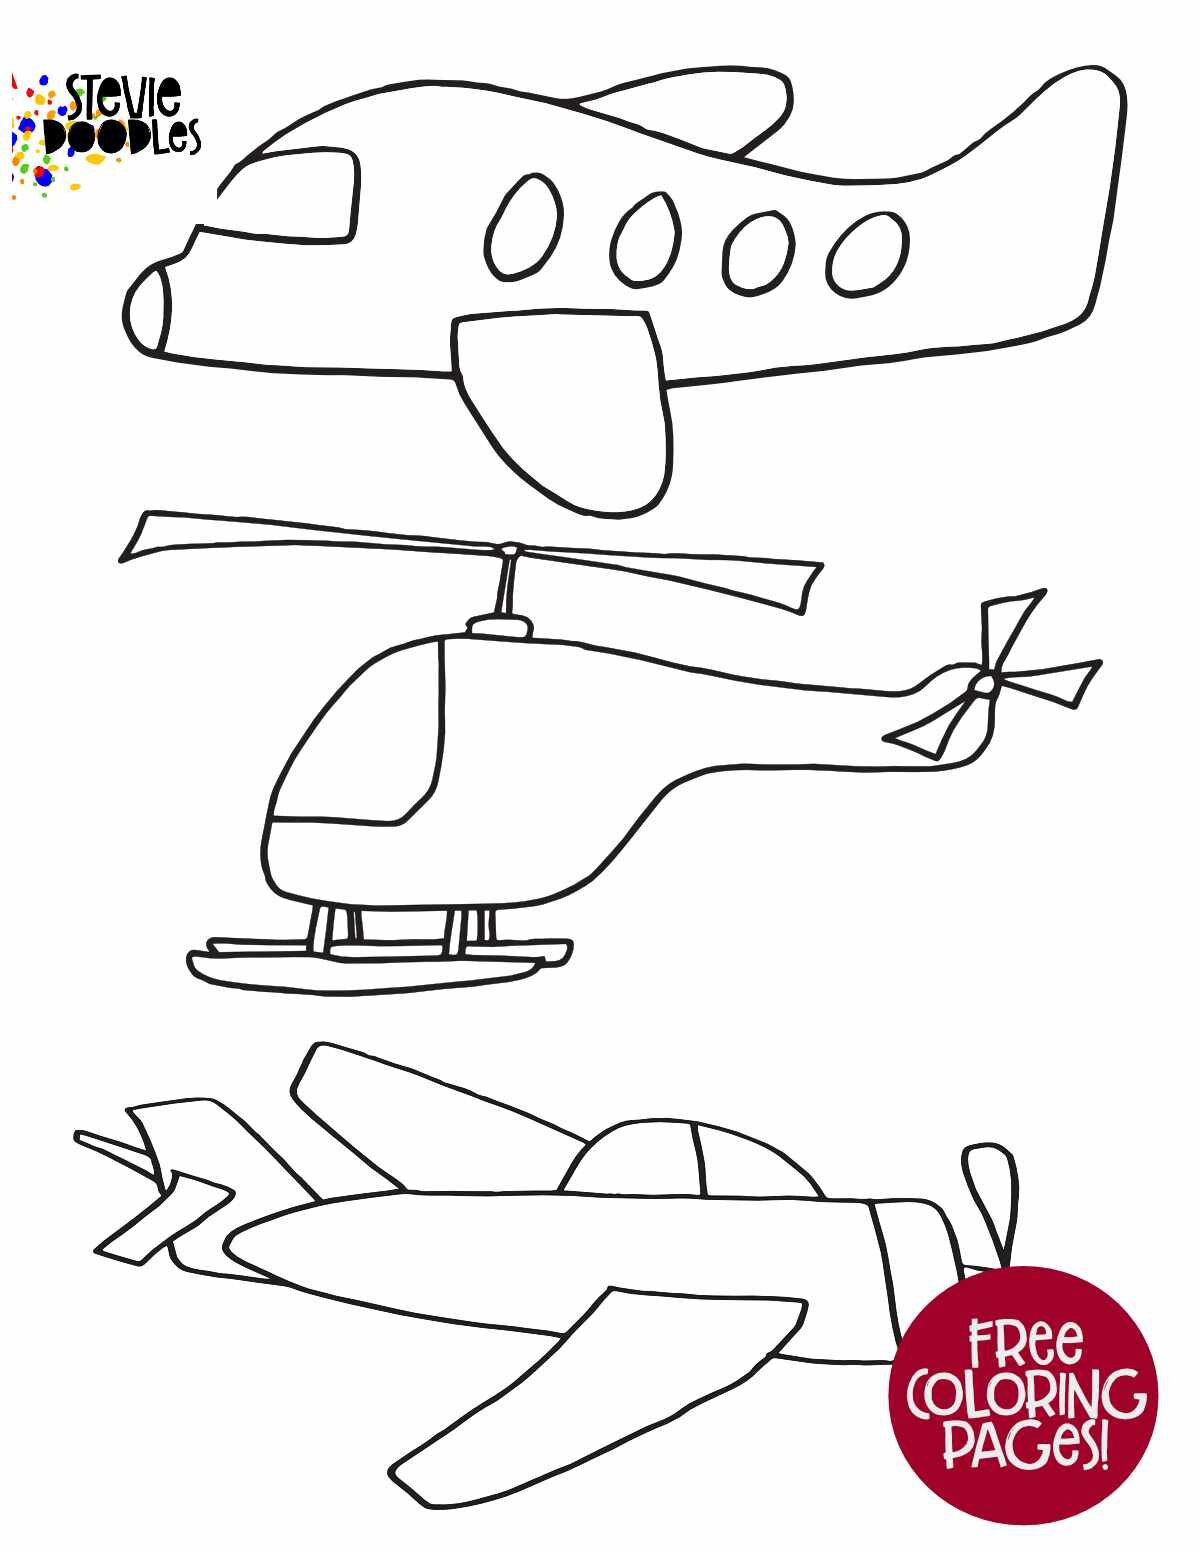 2 Planes &amp; A Helicopter Free Printable Coloring Page Over 1000 free pages at Stevie Doodles